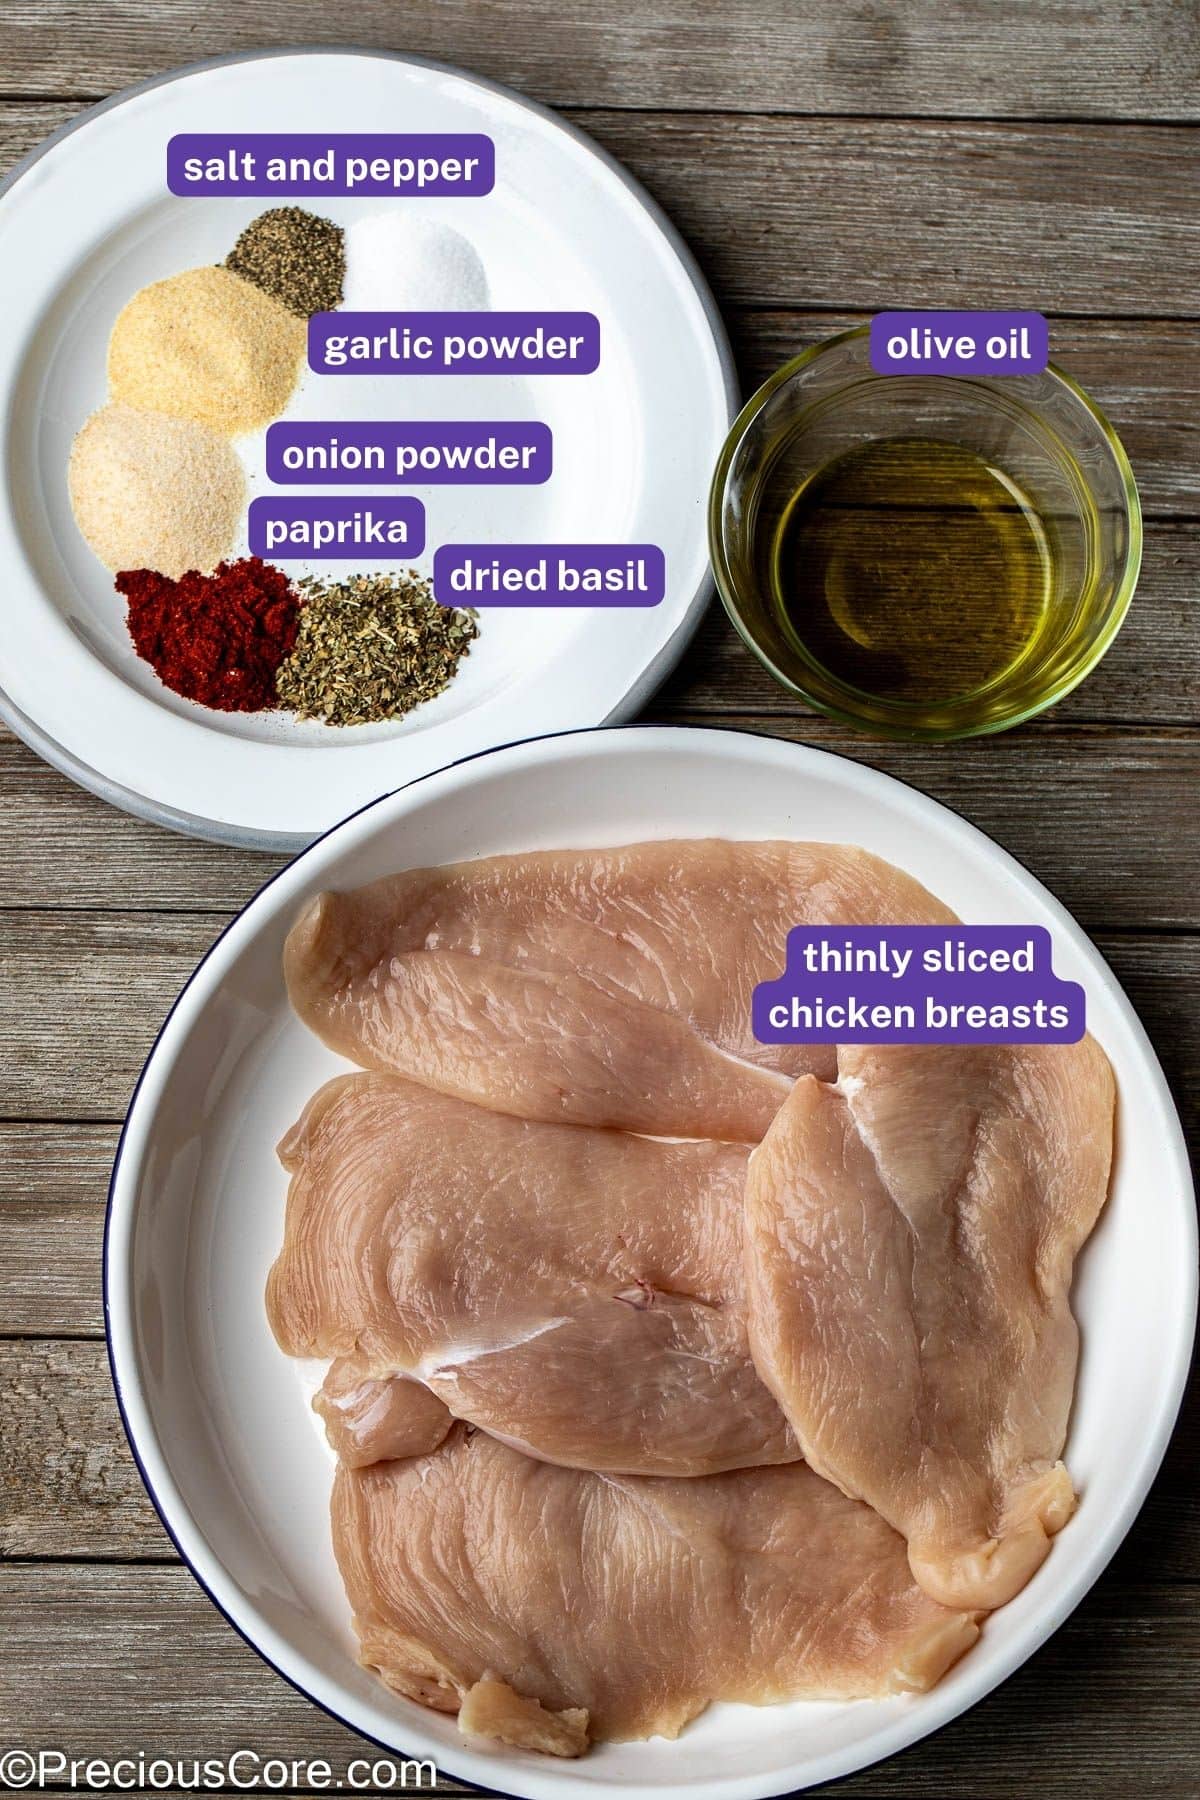 Ingredients for baked chicken with labels on them.